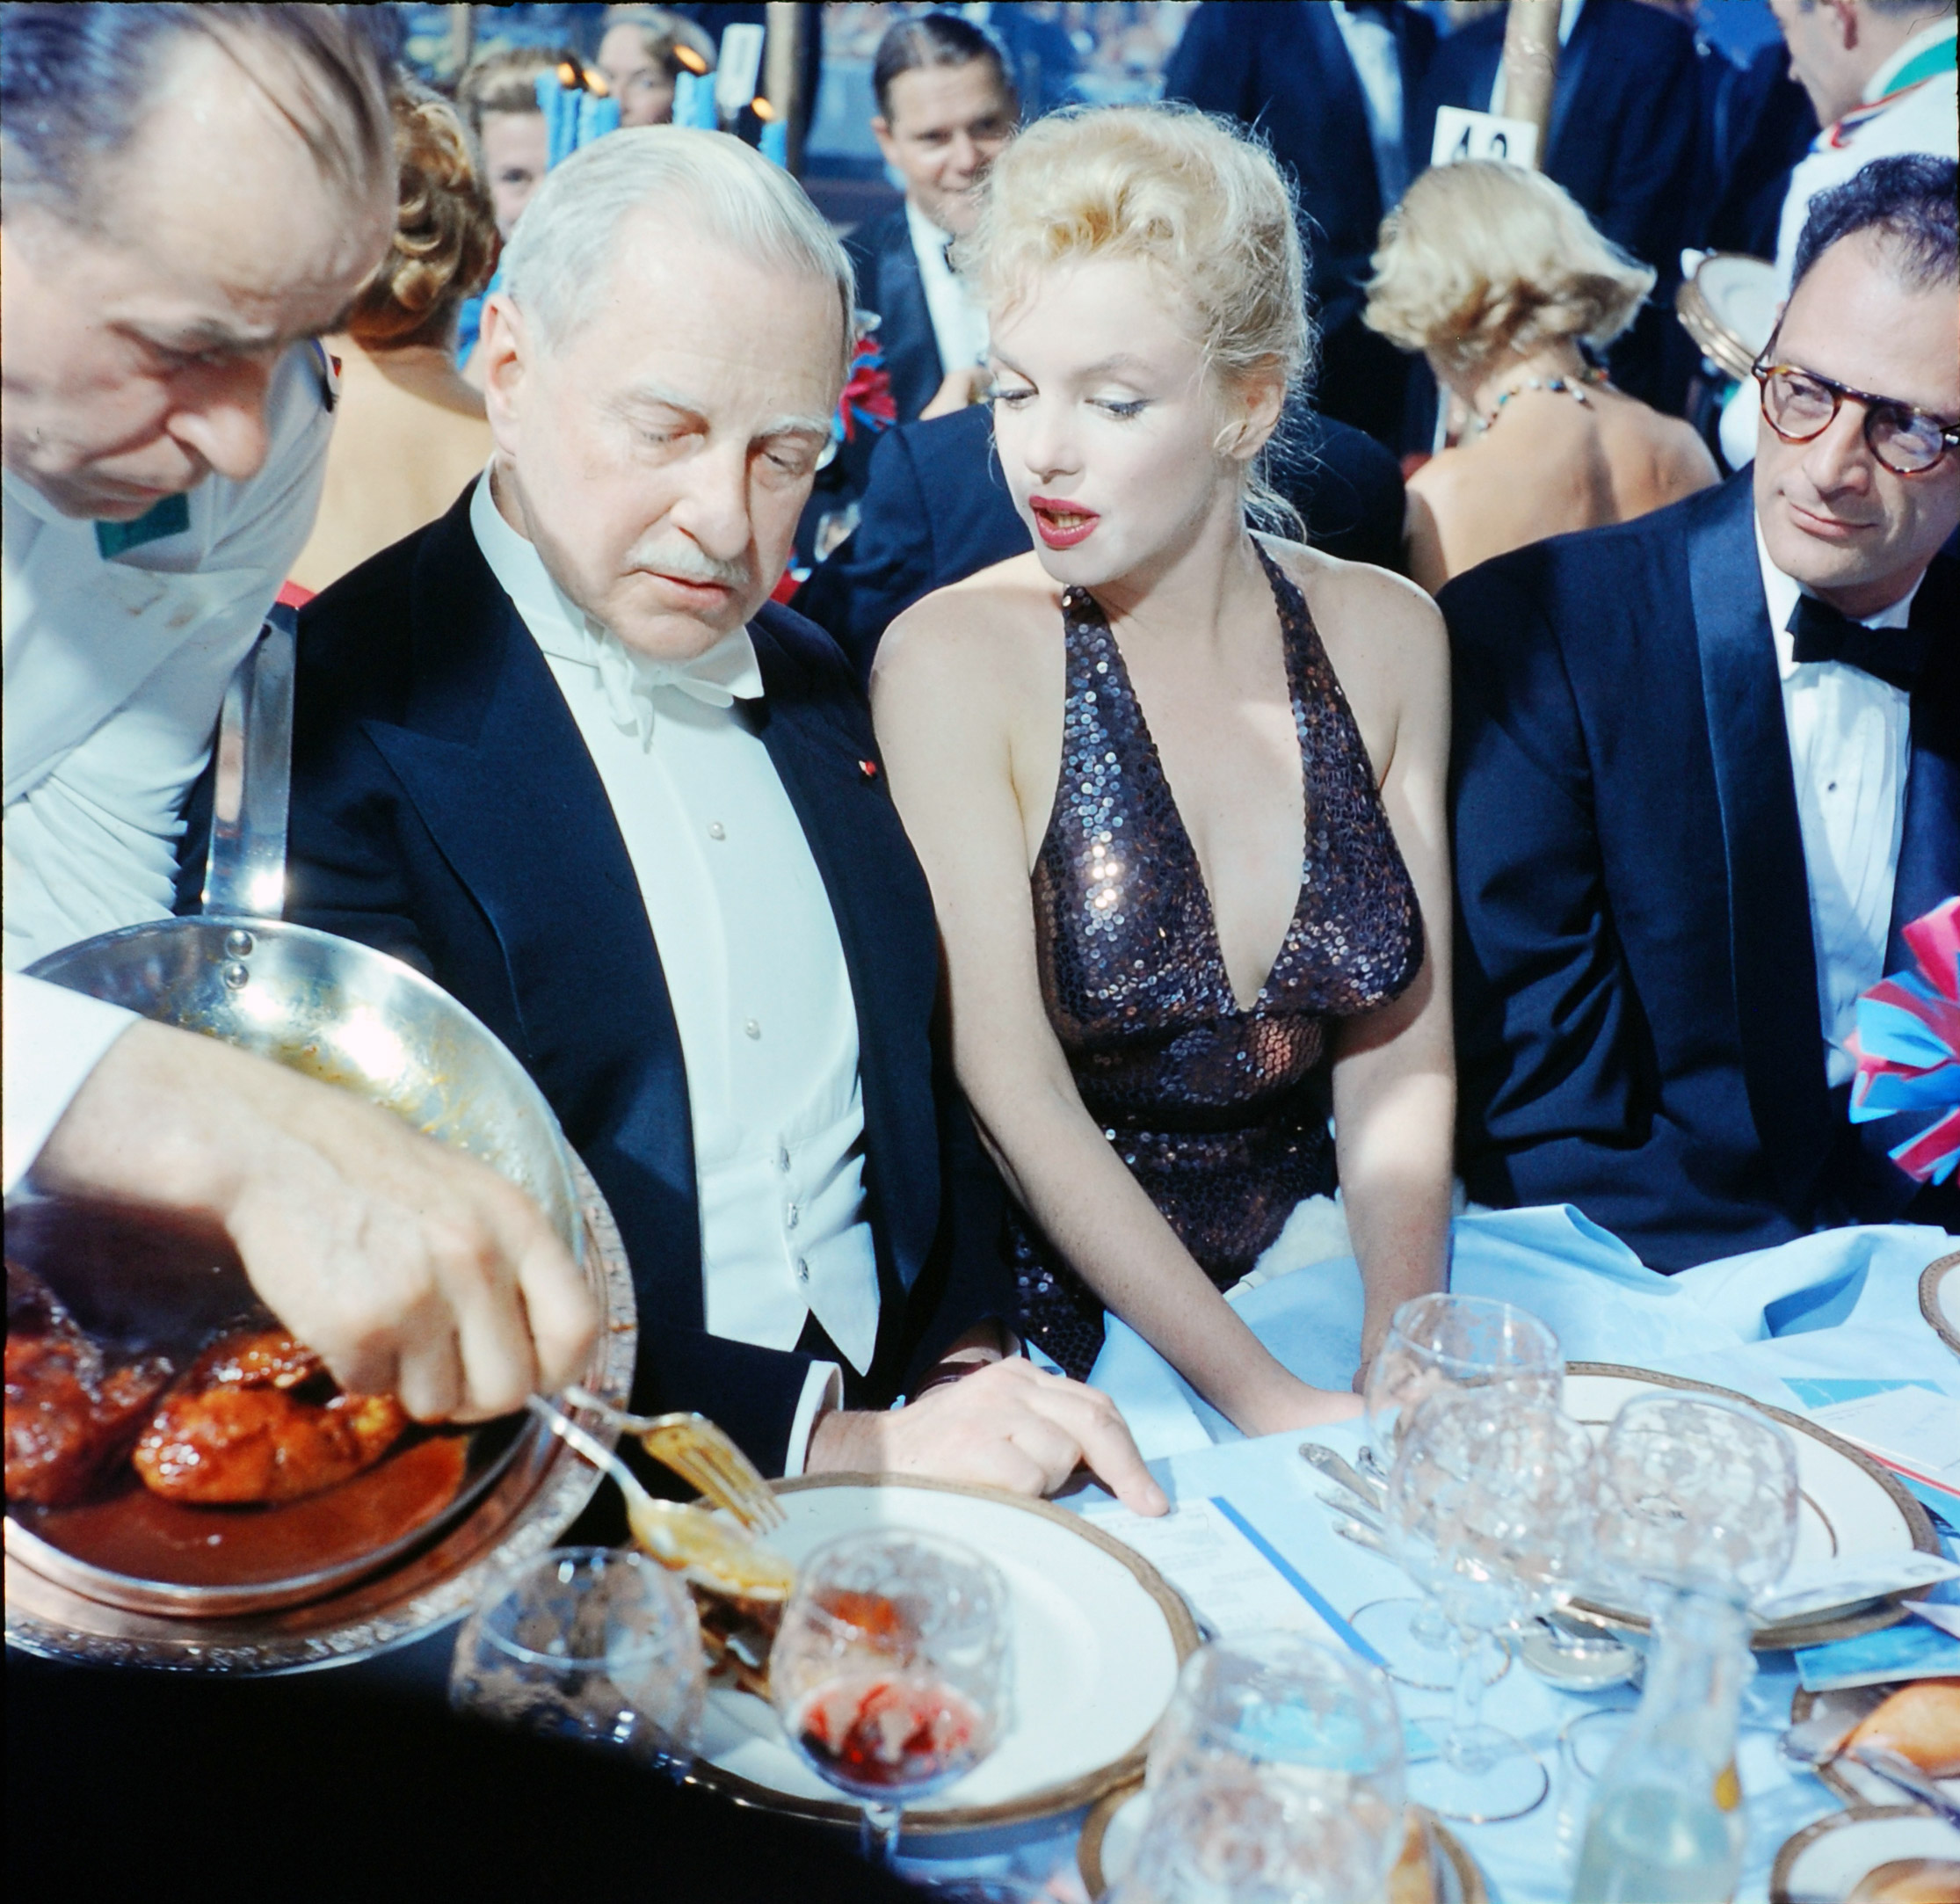 April in Paris Ball - Waldorf Astoria Hotel - Society Serves Charity and French-American relations in New York hosted by Mrs. William C.T. Gaynor. (L-R) Ambassador Winthrop Aldrich, ex-envoy to Britain chatting w. actress Marilyn Monroe as her husband, playwright Arthur Miller looks on, 1957.